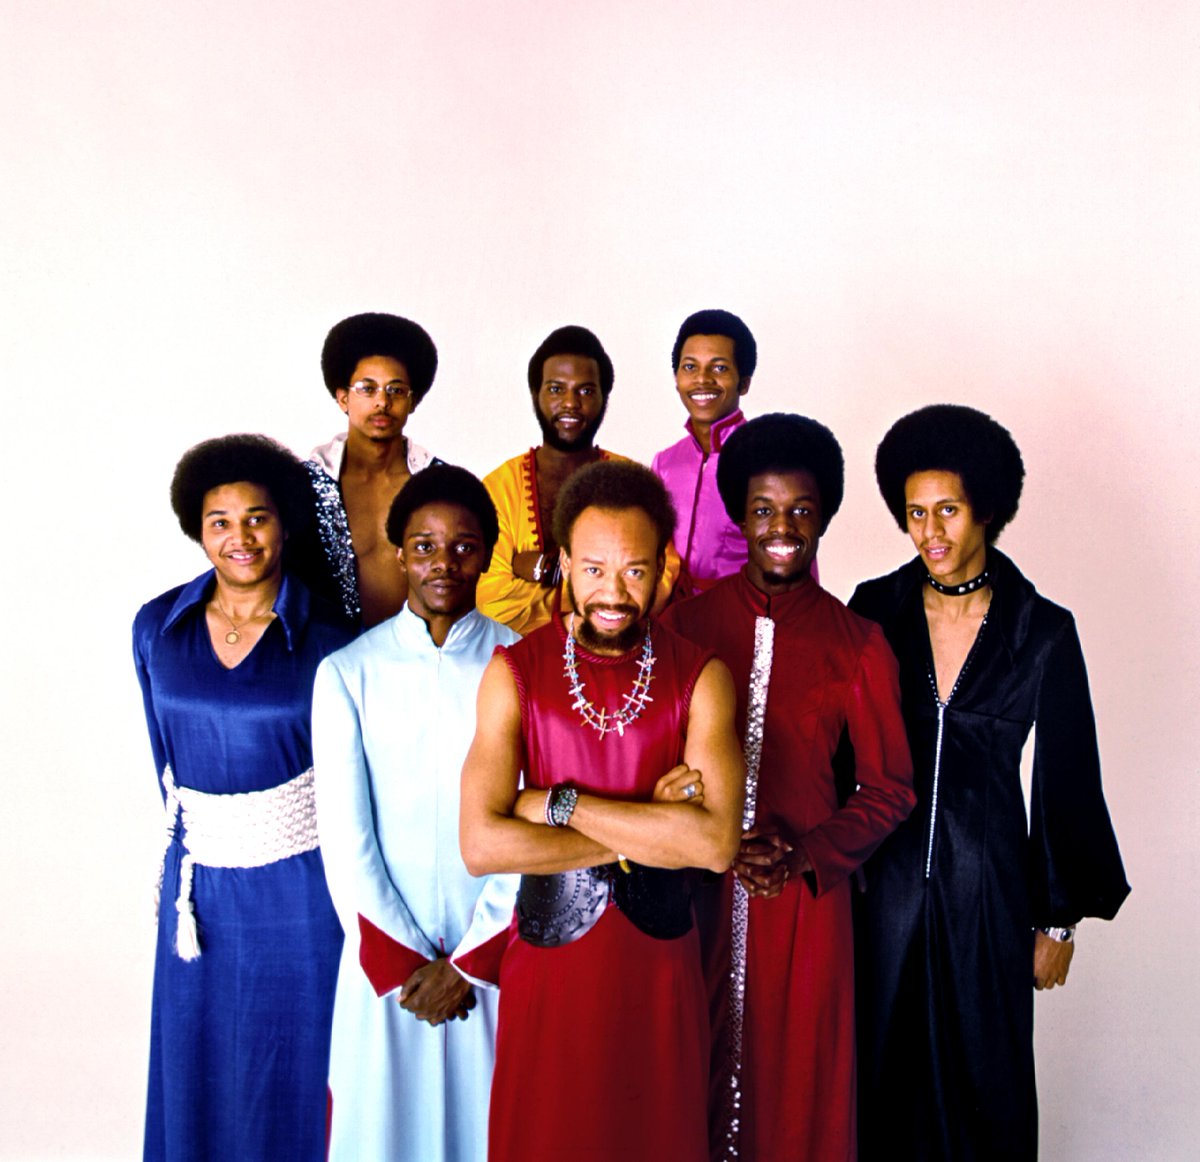 If I had to pick only one artist or group that I had to listen to for the rest of my life it would be Earth, Wind & Fire. #GreatestGroupOfAllTime